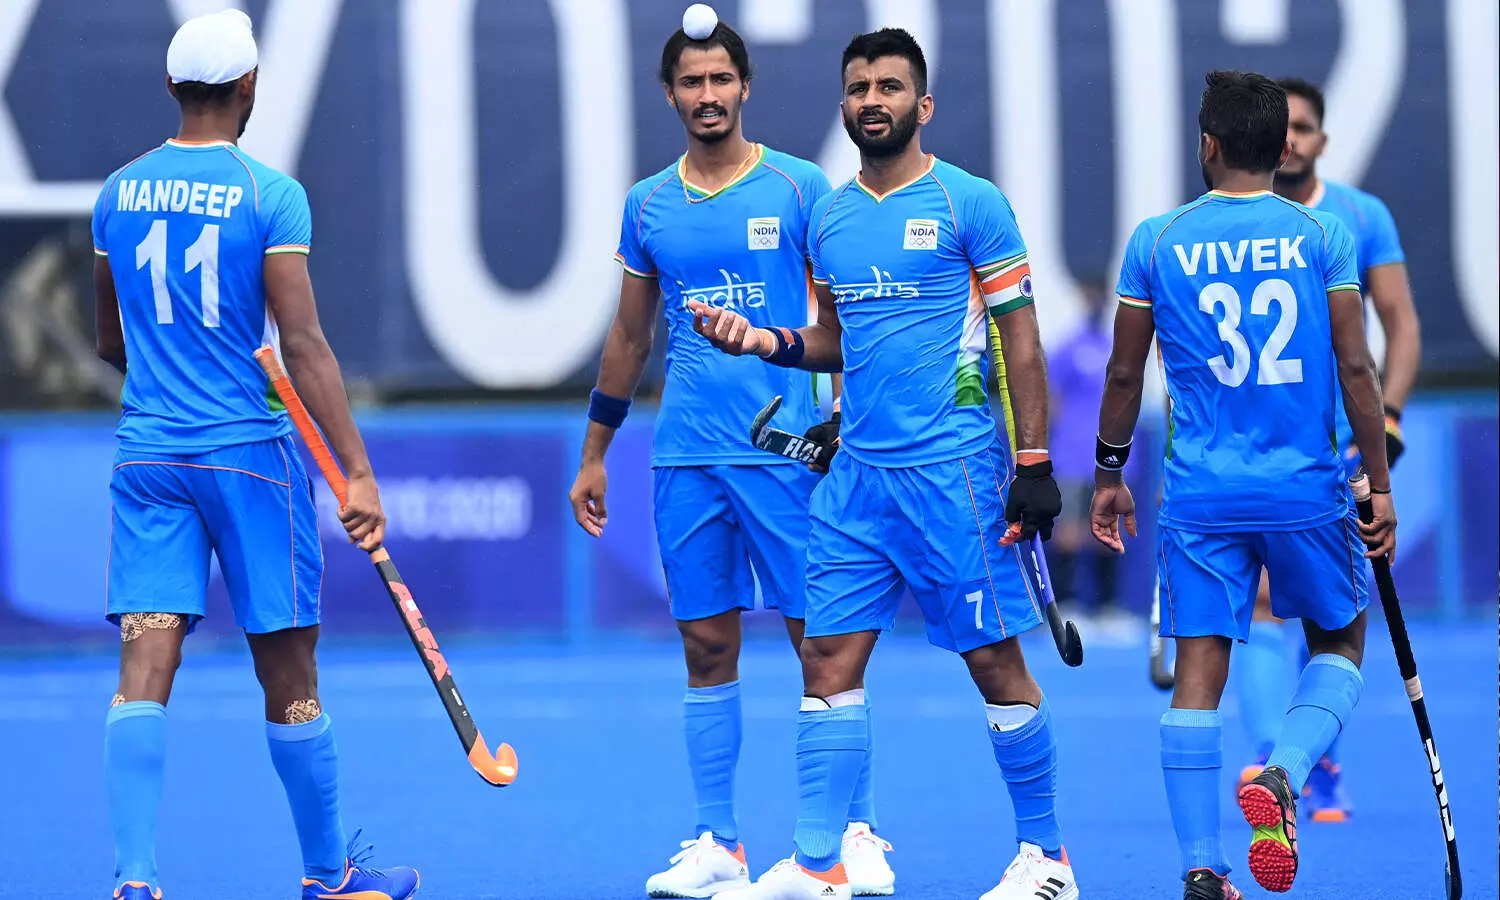 Commonwealth Games 2022 Mens Hockey LIVE India beats Wales 4-1- Scores, Updates, Live Blog